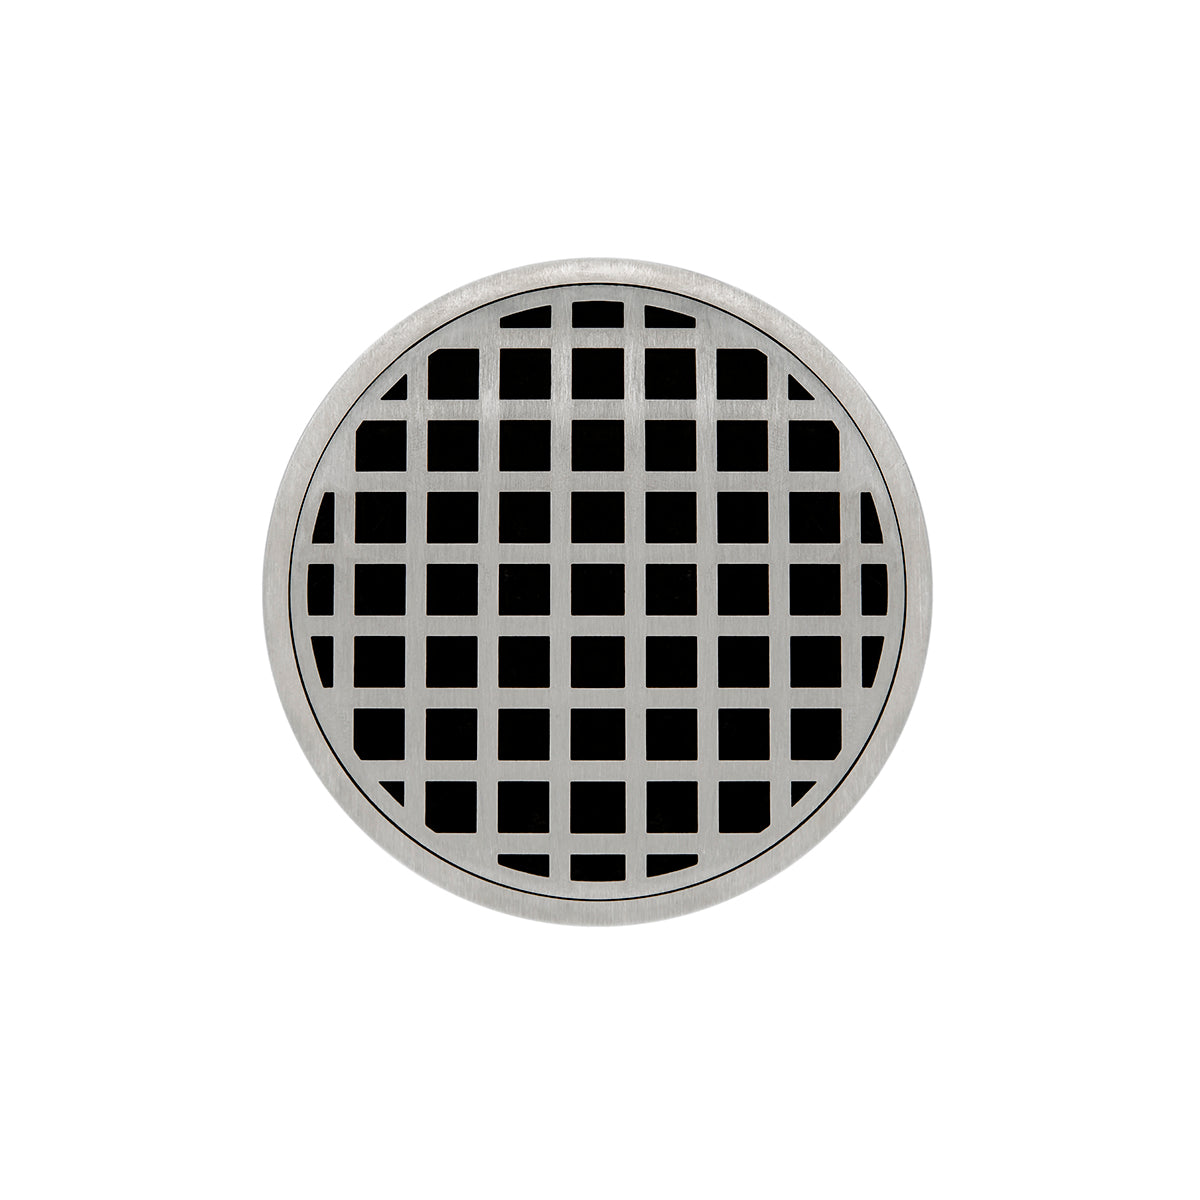 Infinity Drain 5" Round RQD 5 High Flow Premium Center Drain Kit with Squares Pattern Decorative Plate with ABS Drain Body, 3" Outlet